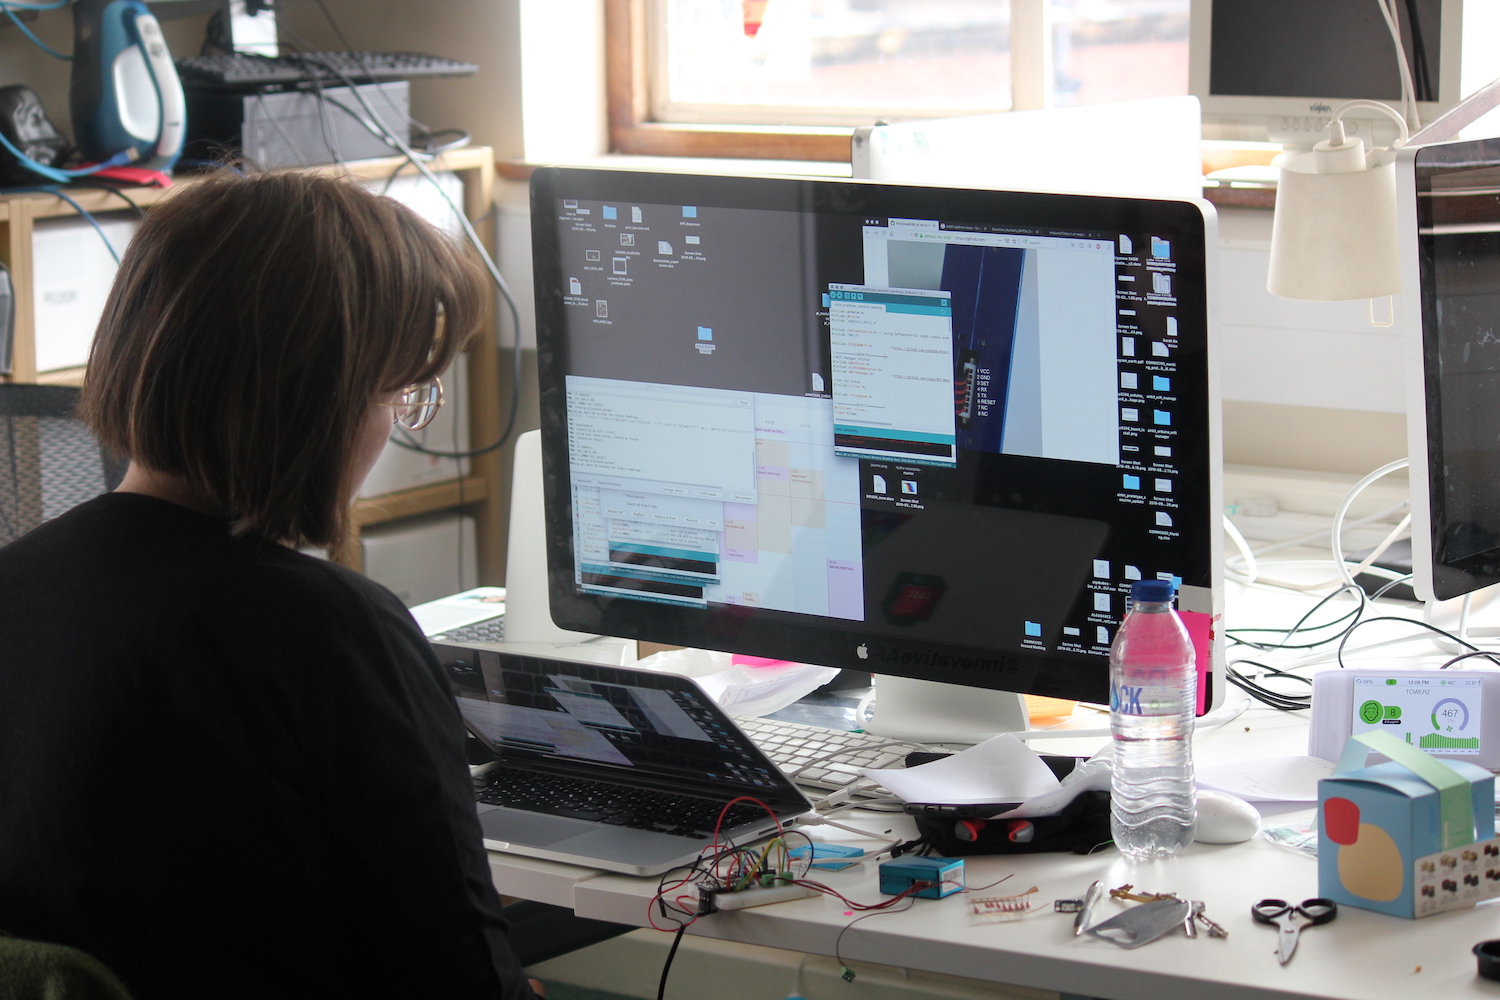 A researcher looks at her screen in an office with lots of electronic equipment around